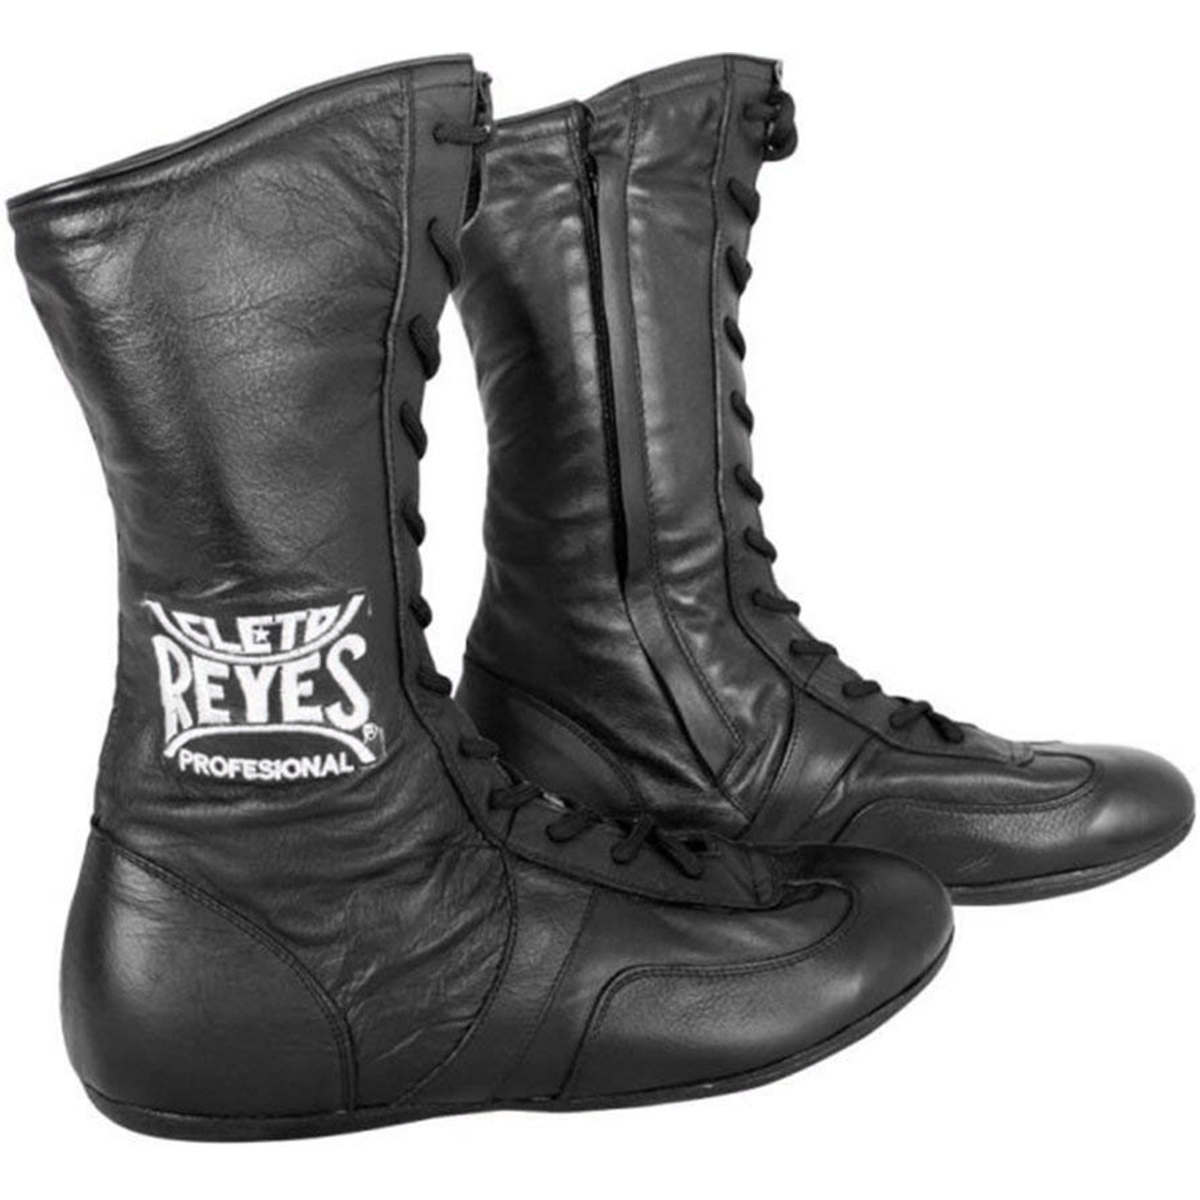 Cleto Reyes Leather Lace Up High Top Boxing Shoes - Size: 7 - Black - image 1 of 4